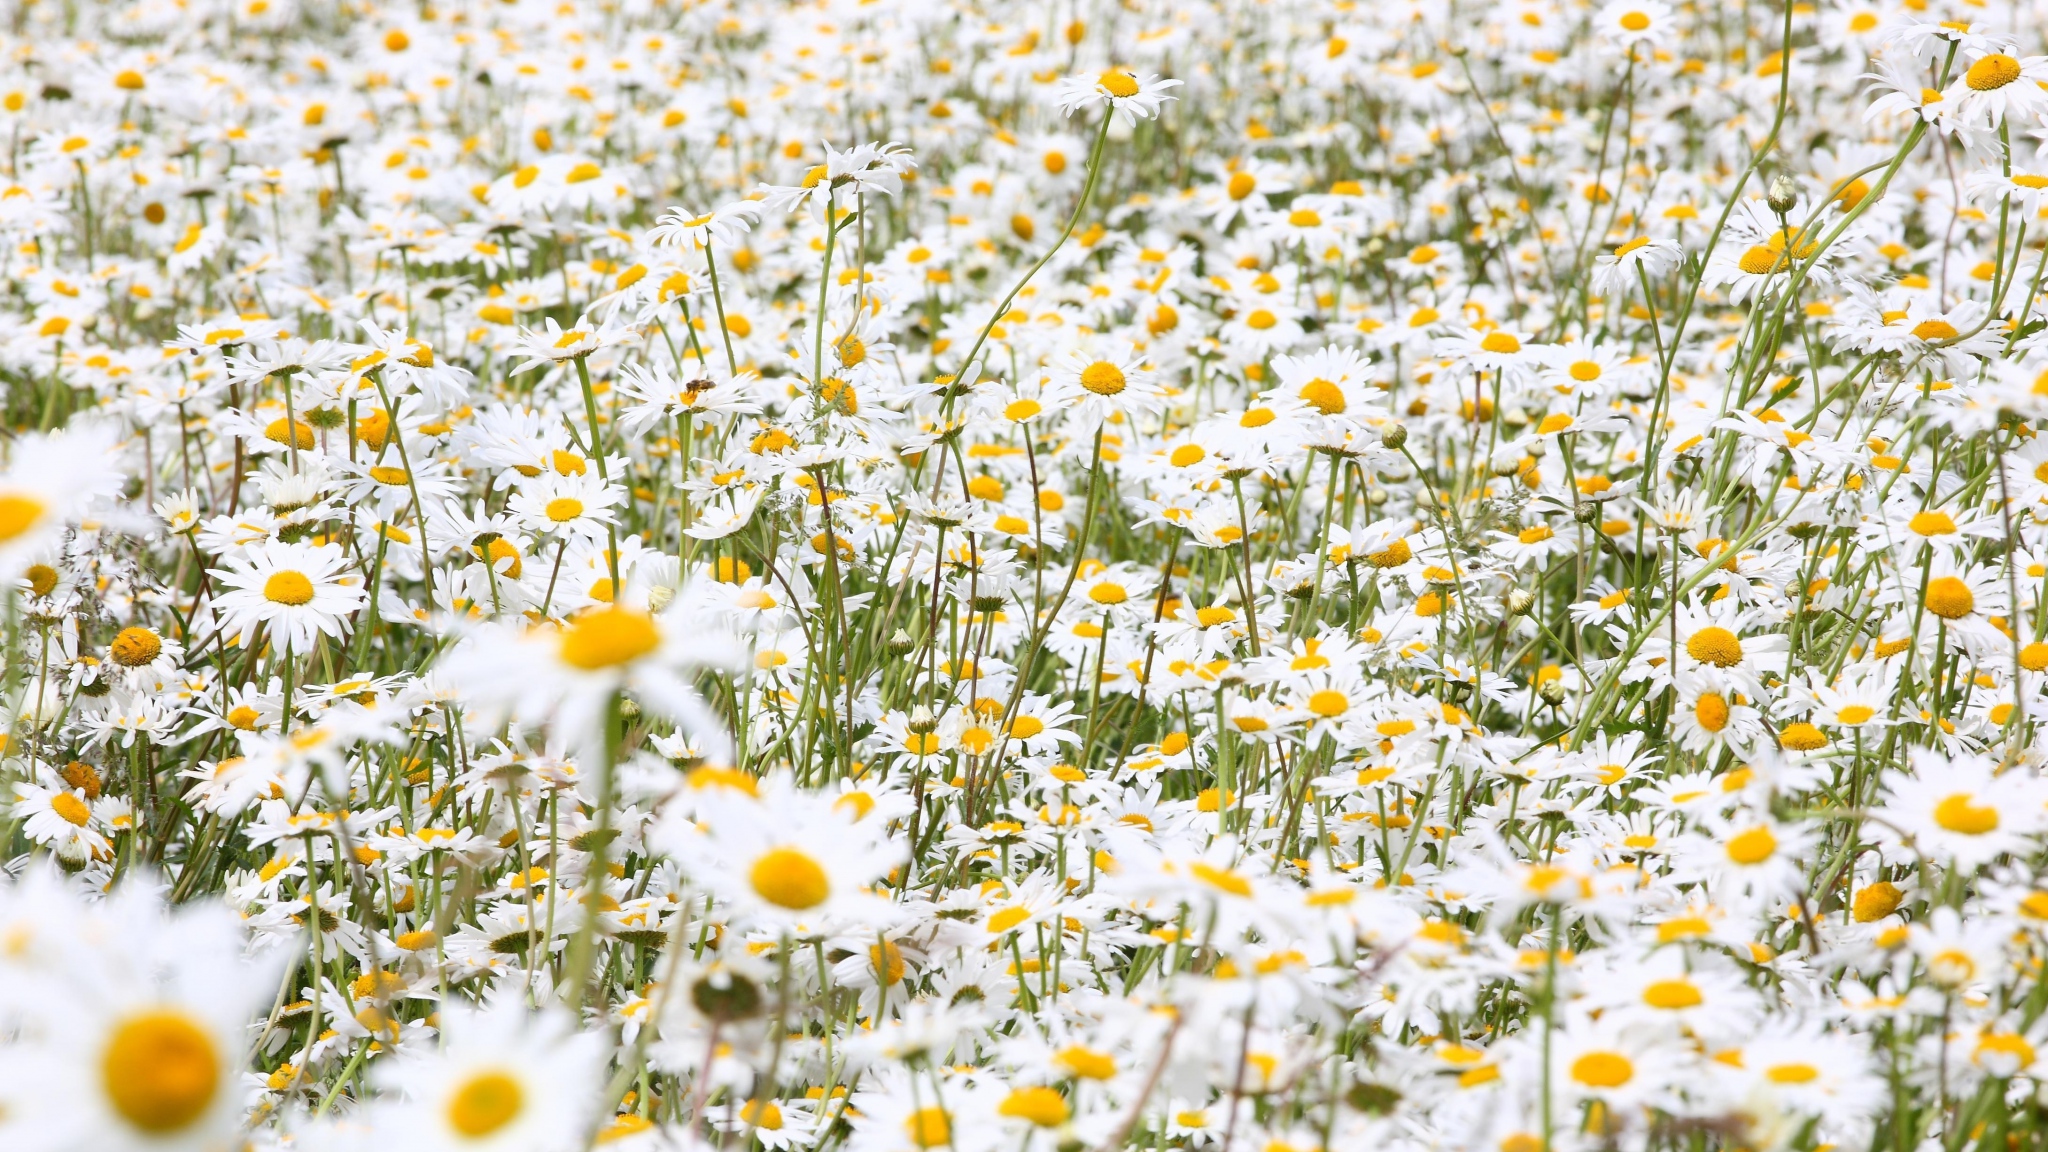 Download Wallpaper 2048x1152 Daisies, Flowers, Field, Many, Summer ...